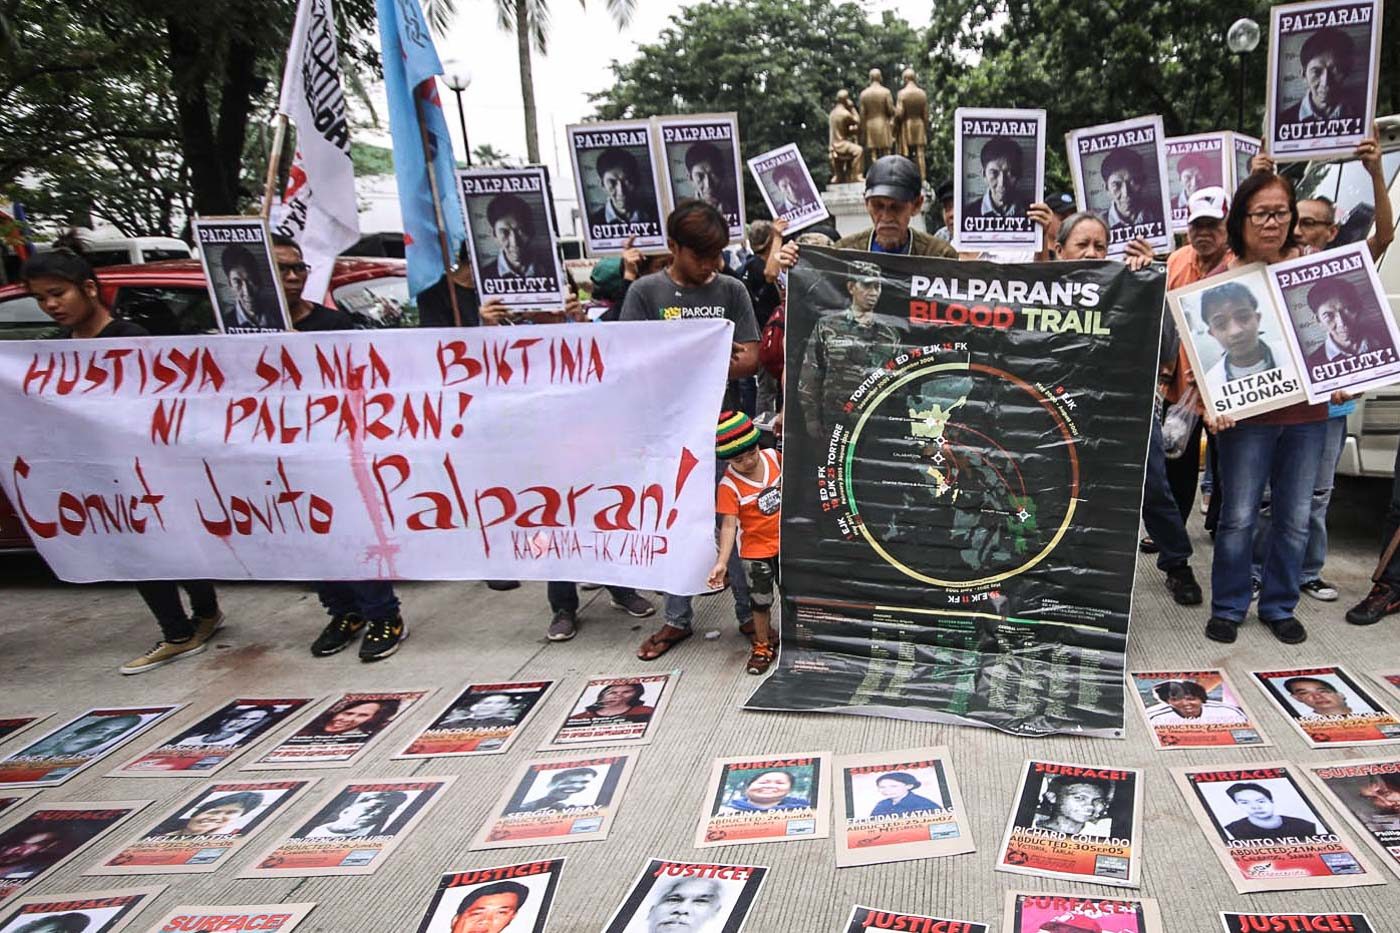 ‘Big blow against impunity’: Human rights groups welcome Palparan conviction